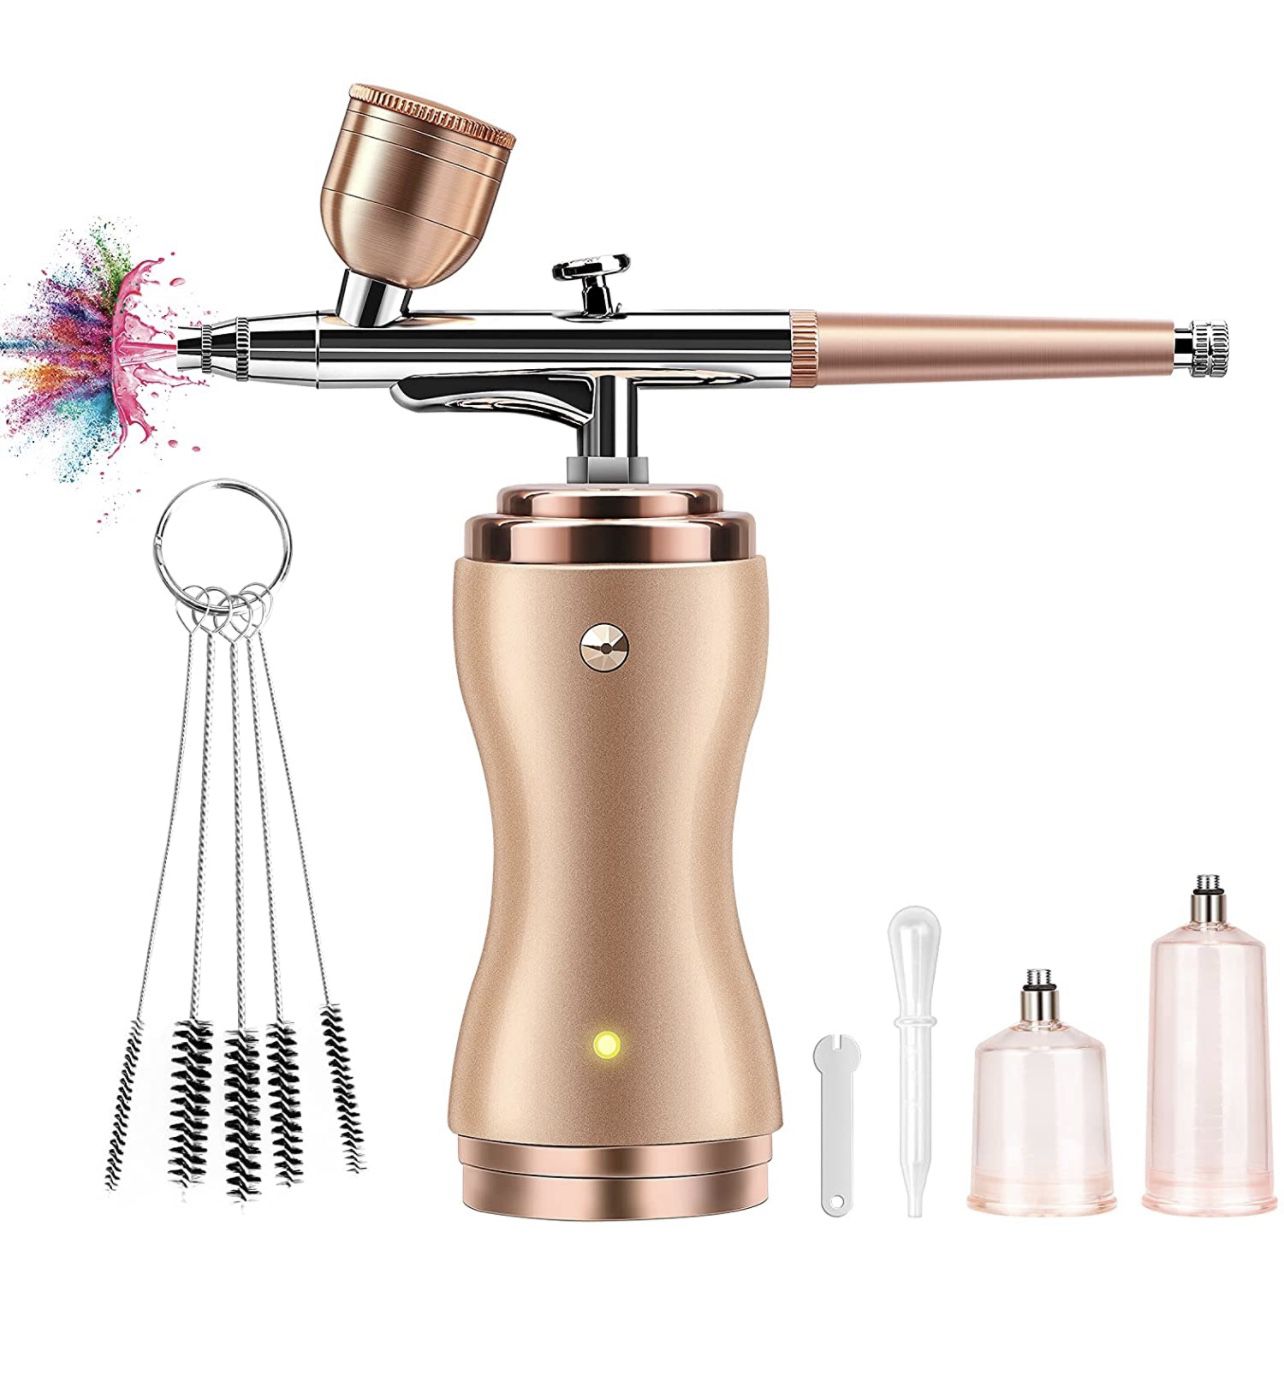 Airbrush Kit with Compressor, Portable Cordless Air Brush Gun Set for Painting